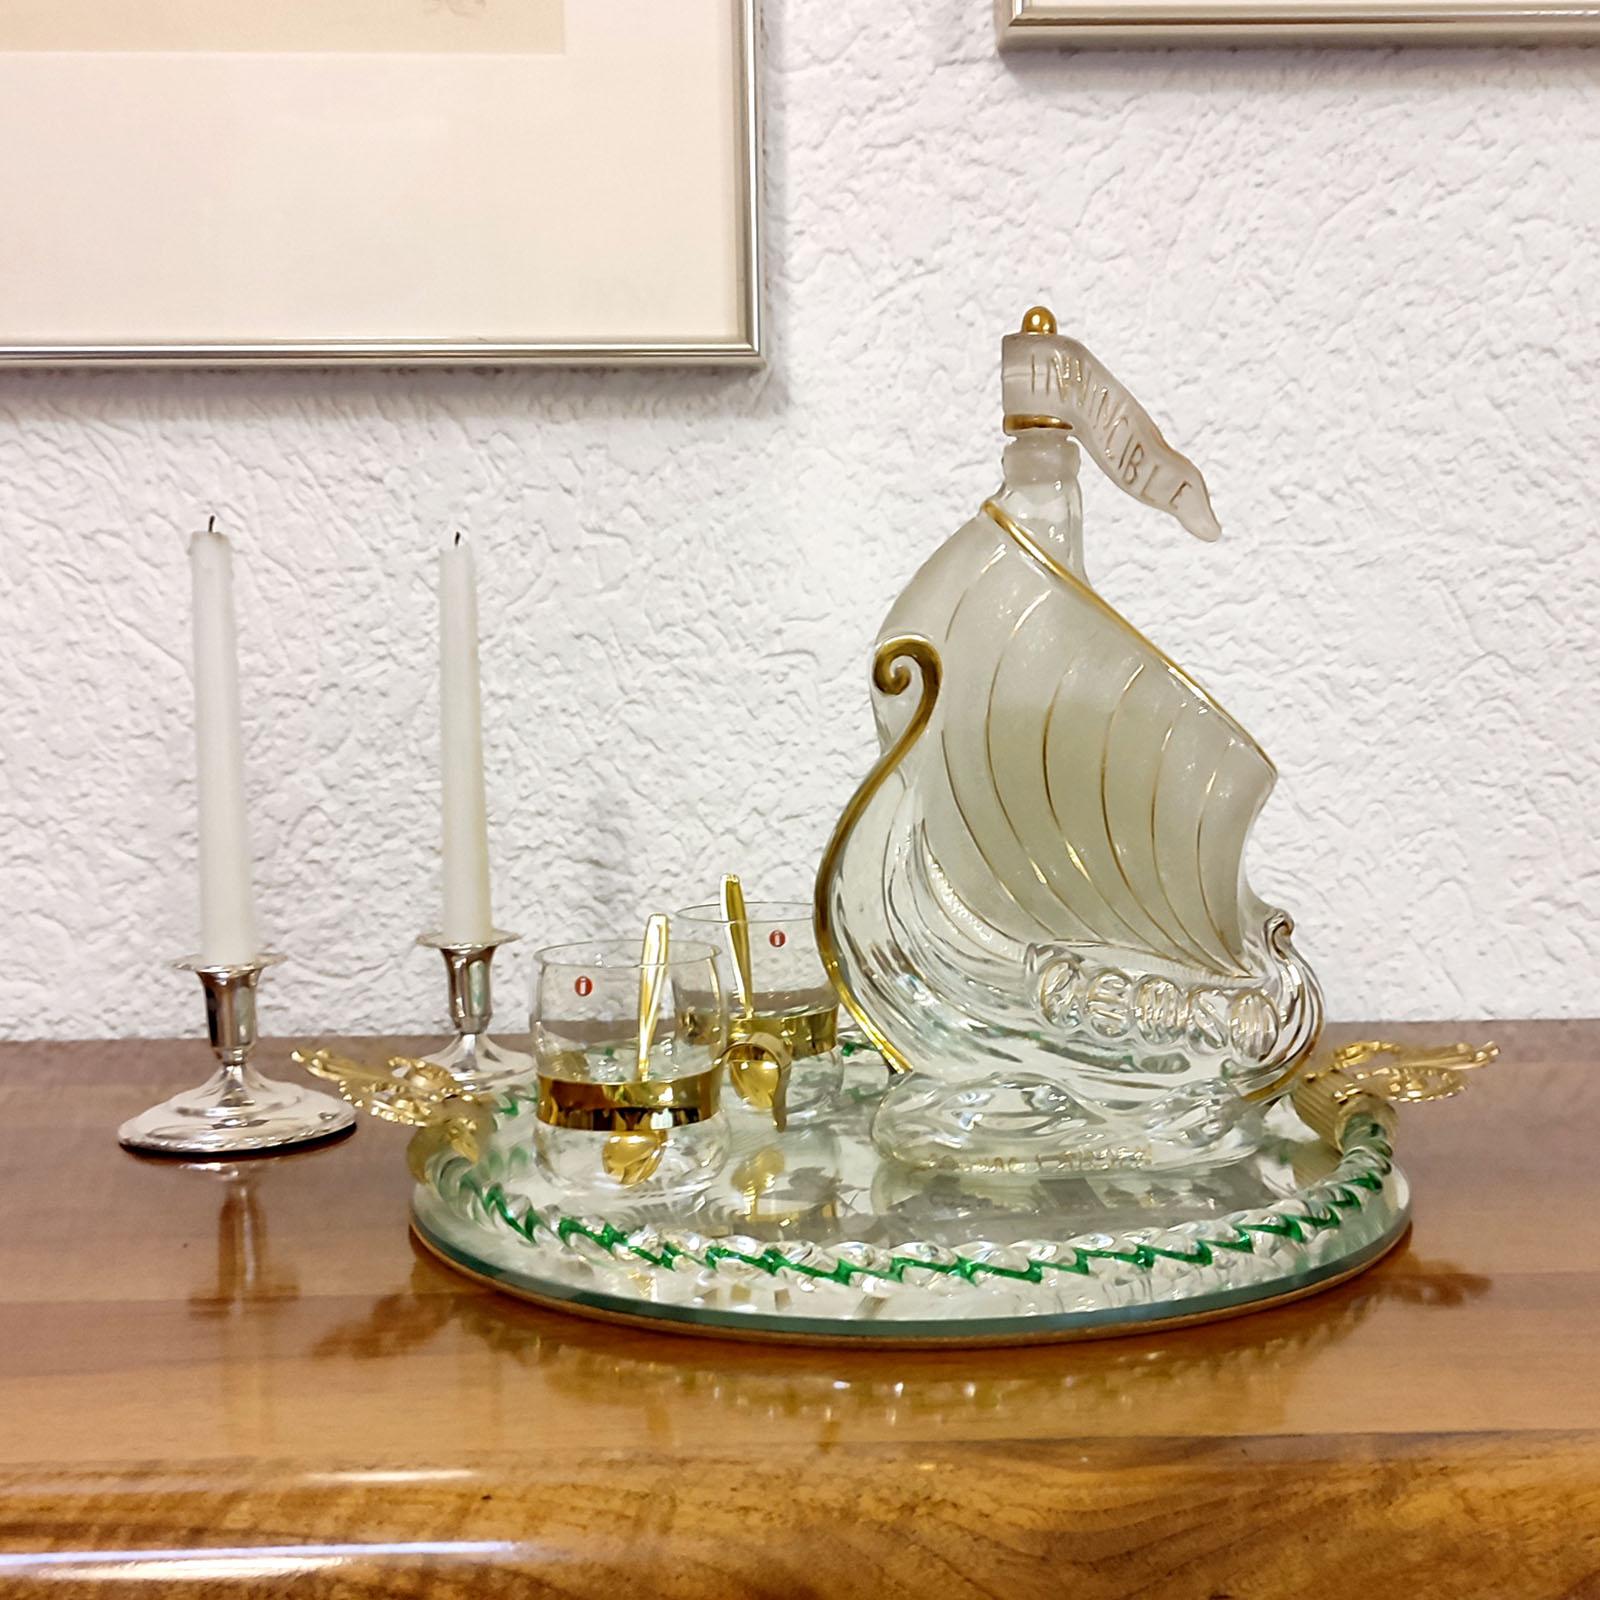 Very attractive cognac decanter with stopper, shaped as a Viking ship. Made of clear glass, frosted glass and gold trim highlighting the shape of the ship. Excellent used condition.
Dimensions: 20 x 7.5 x 31 cm (8x3x12 in.).